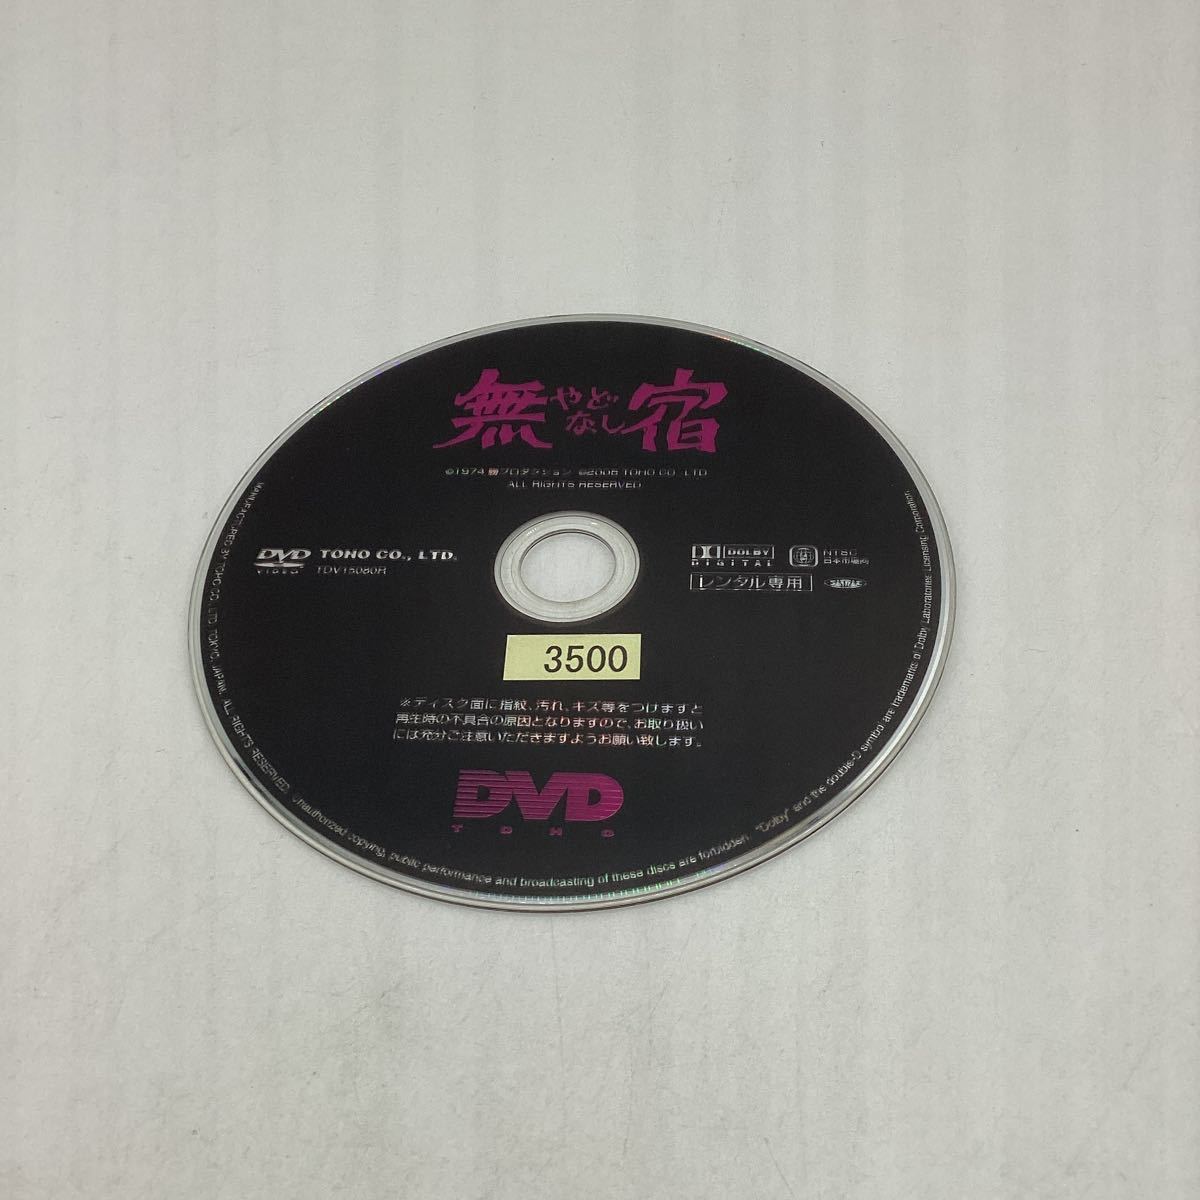 [A13]DVD* less .~.. none - height ..,. new Taro -2 large Star dream. ..! * rental * case less (3500)